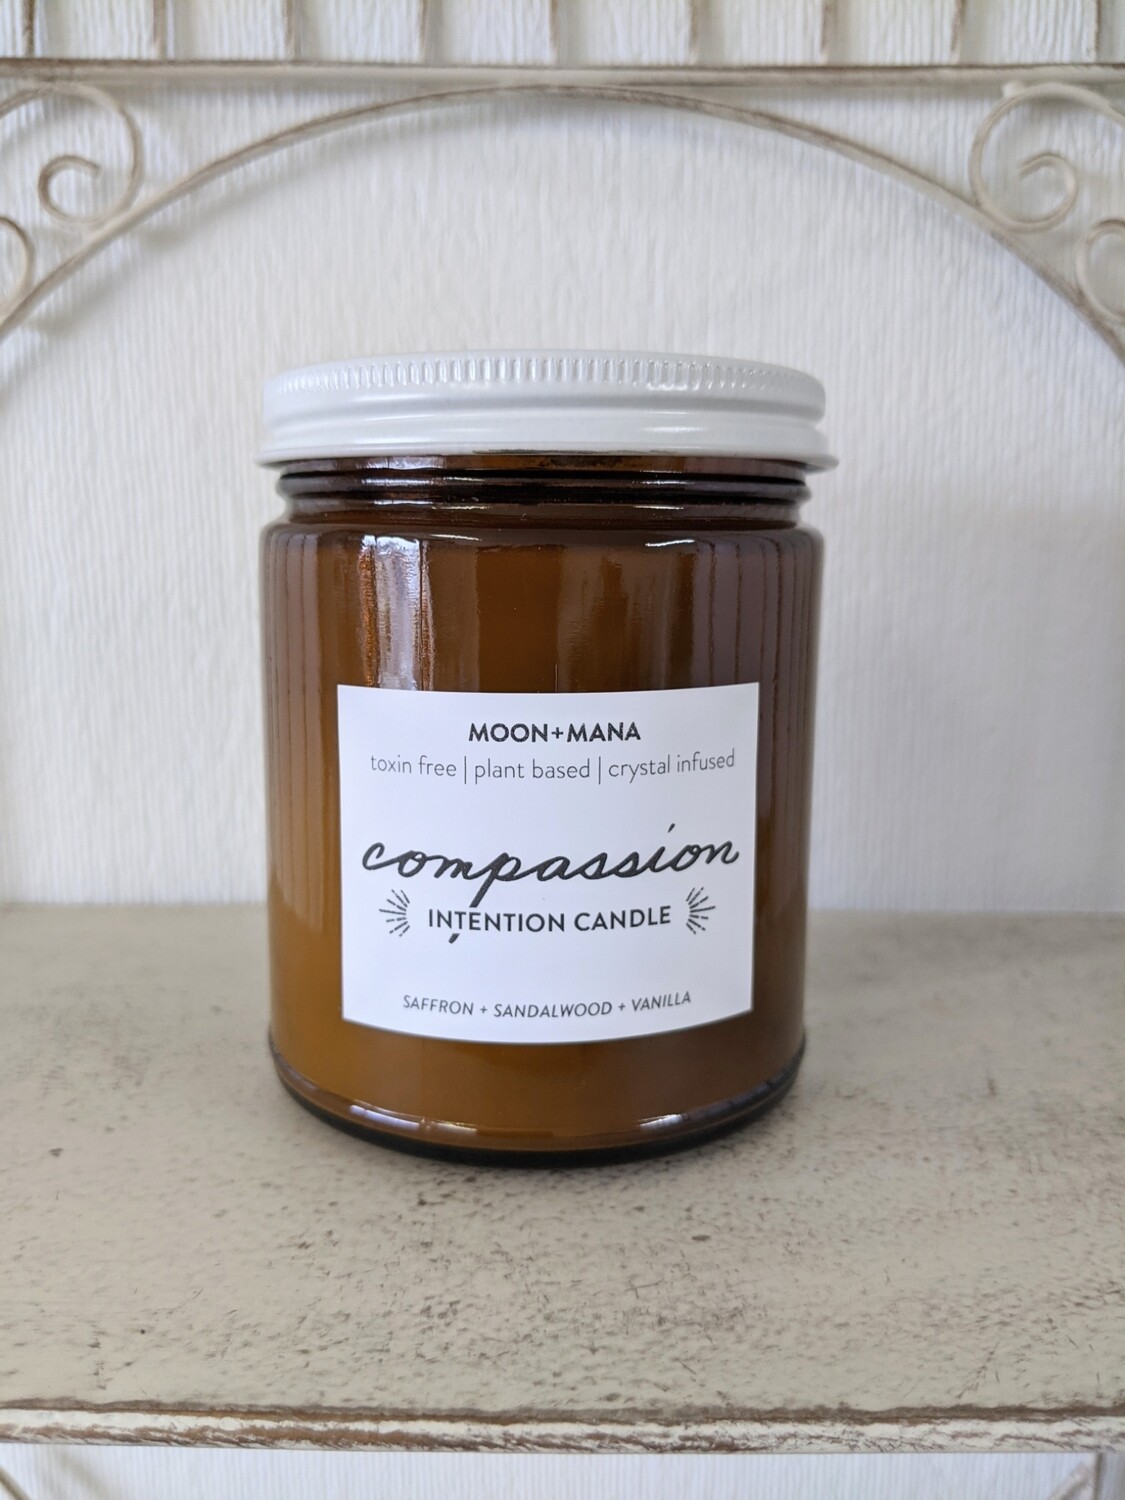 Moon & Mana Intention Candle - Compassion 9oz